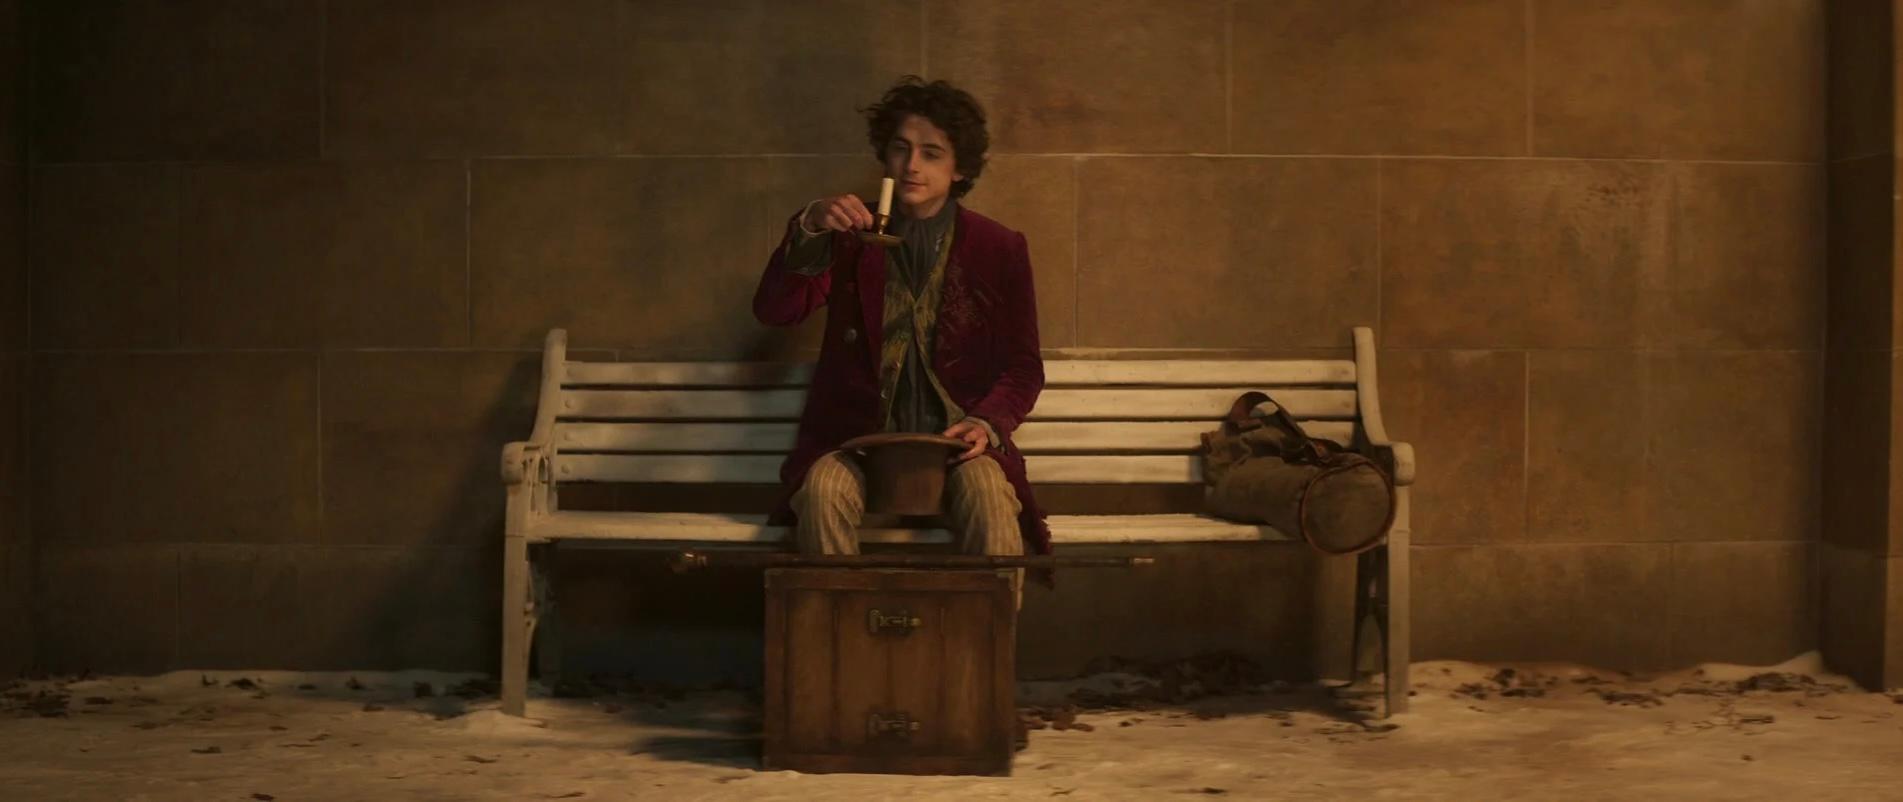 A man in a purple coat sits on a bench in this image from Village Roadshow Pictures.